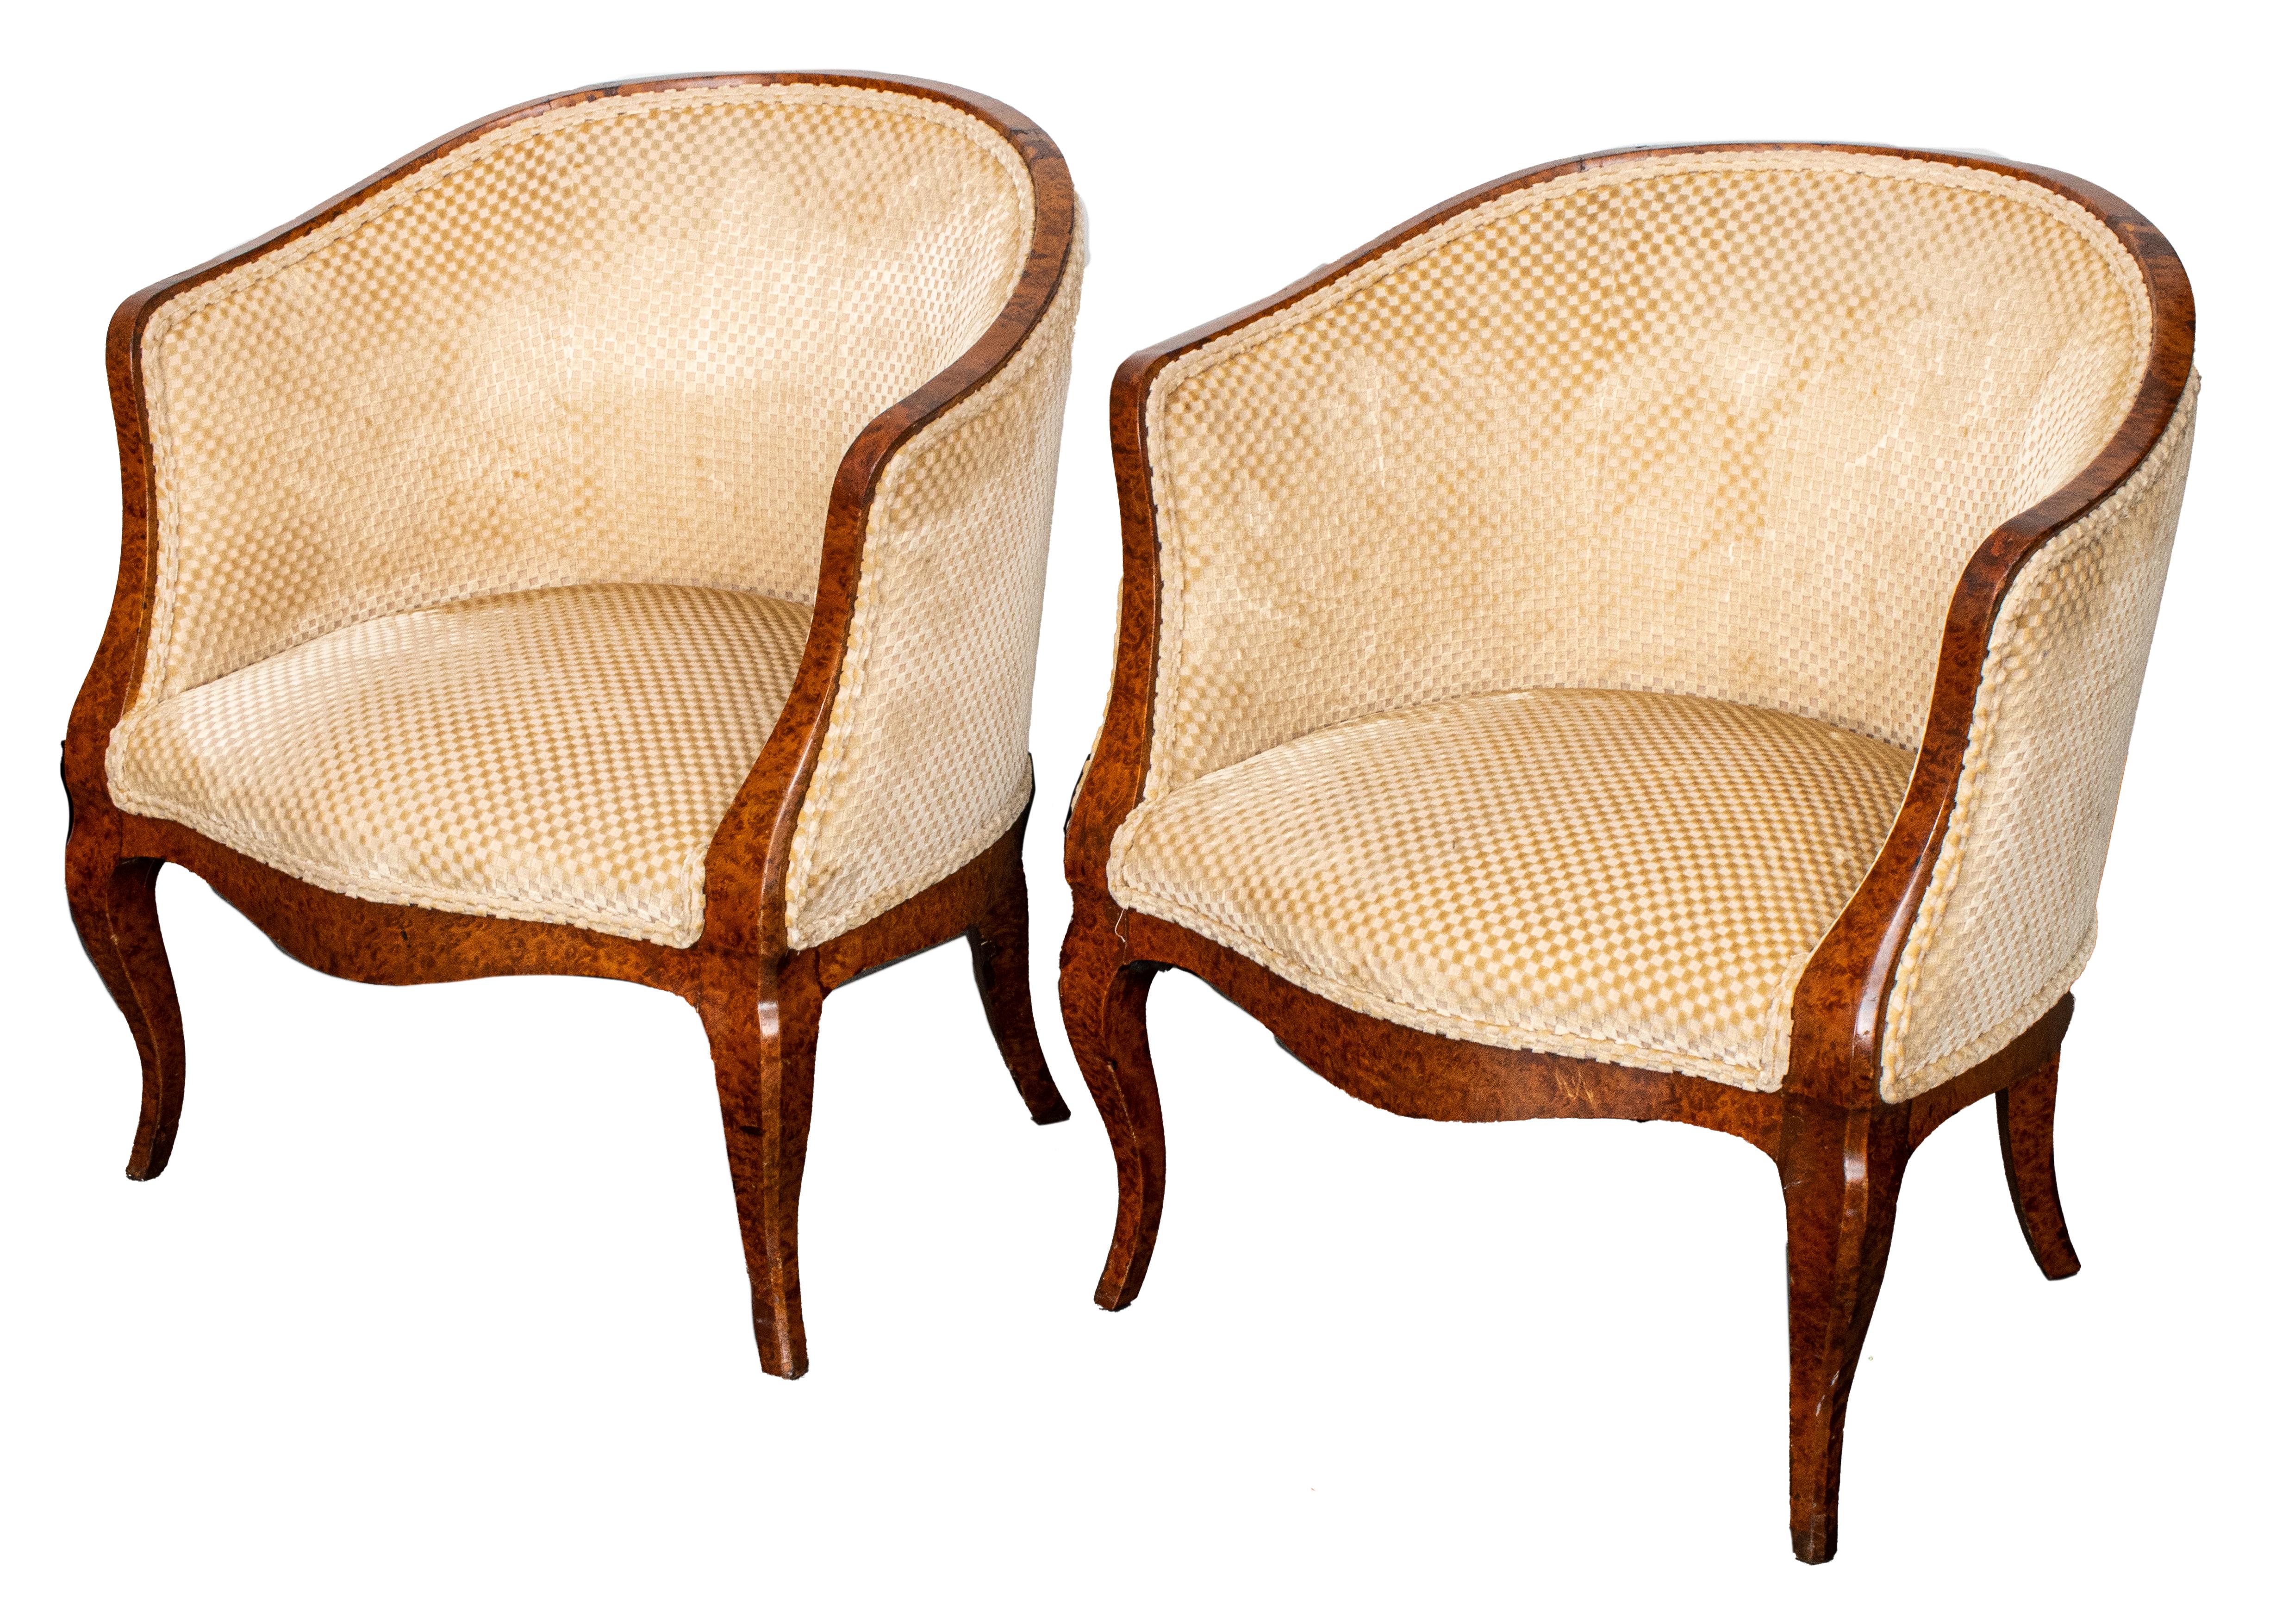 French antique pair of upholstered lounge chairs in burl wood veneer, with barrel backs, on cabriole legs. Measures: 30